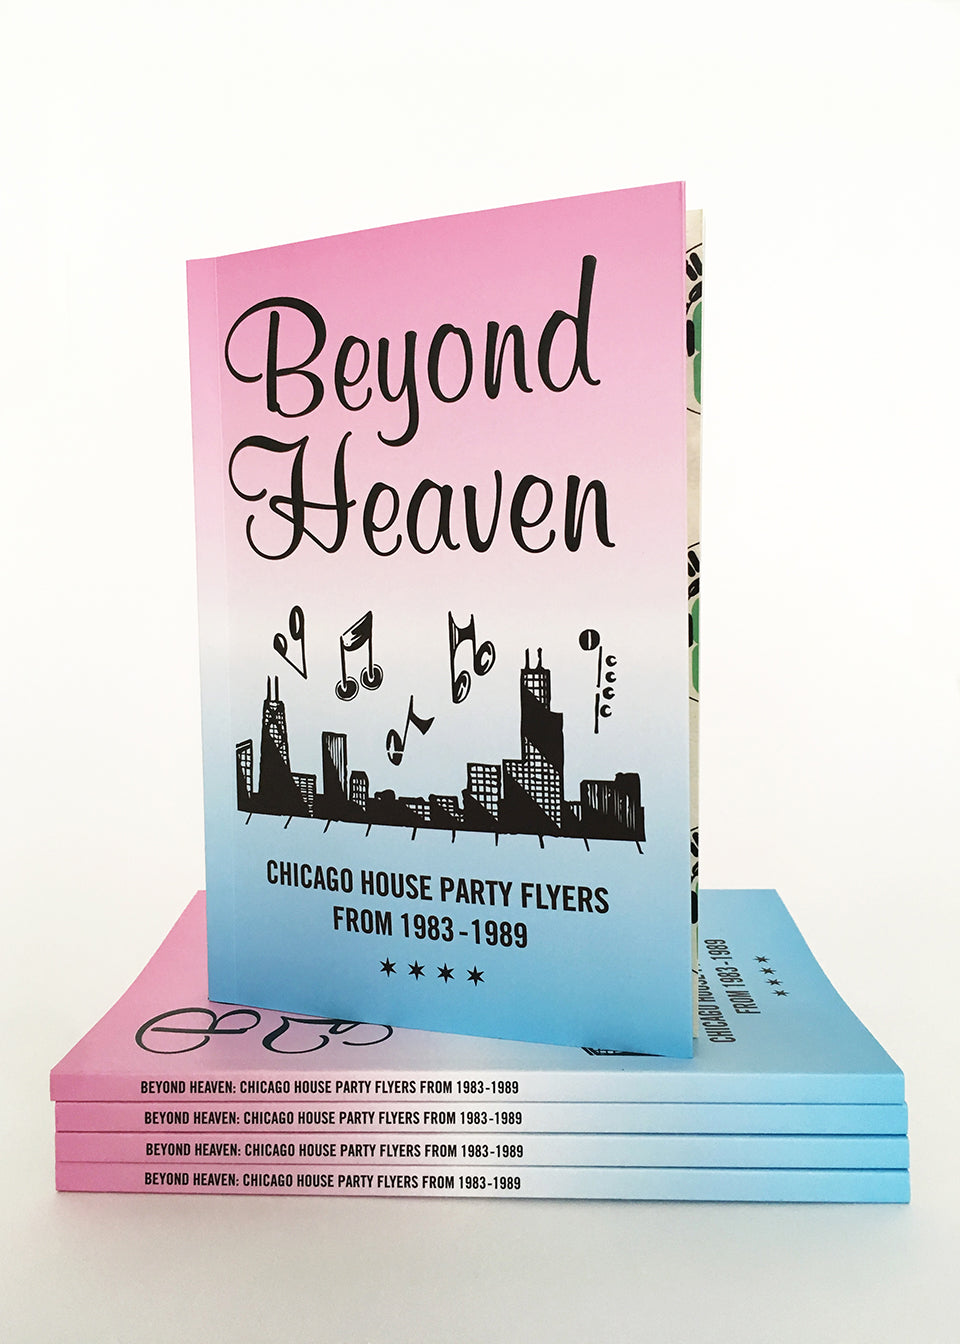 Beyond Heaven: Chicago House Party Flyers from 1983 - 1989